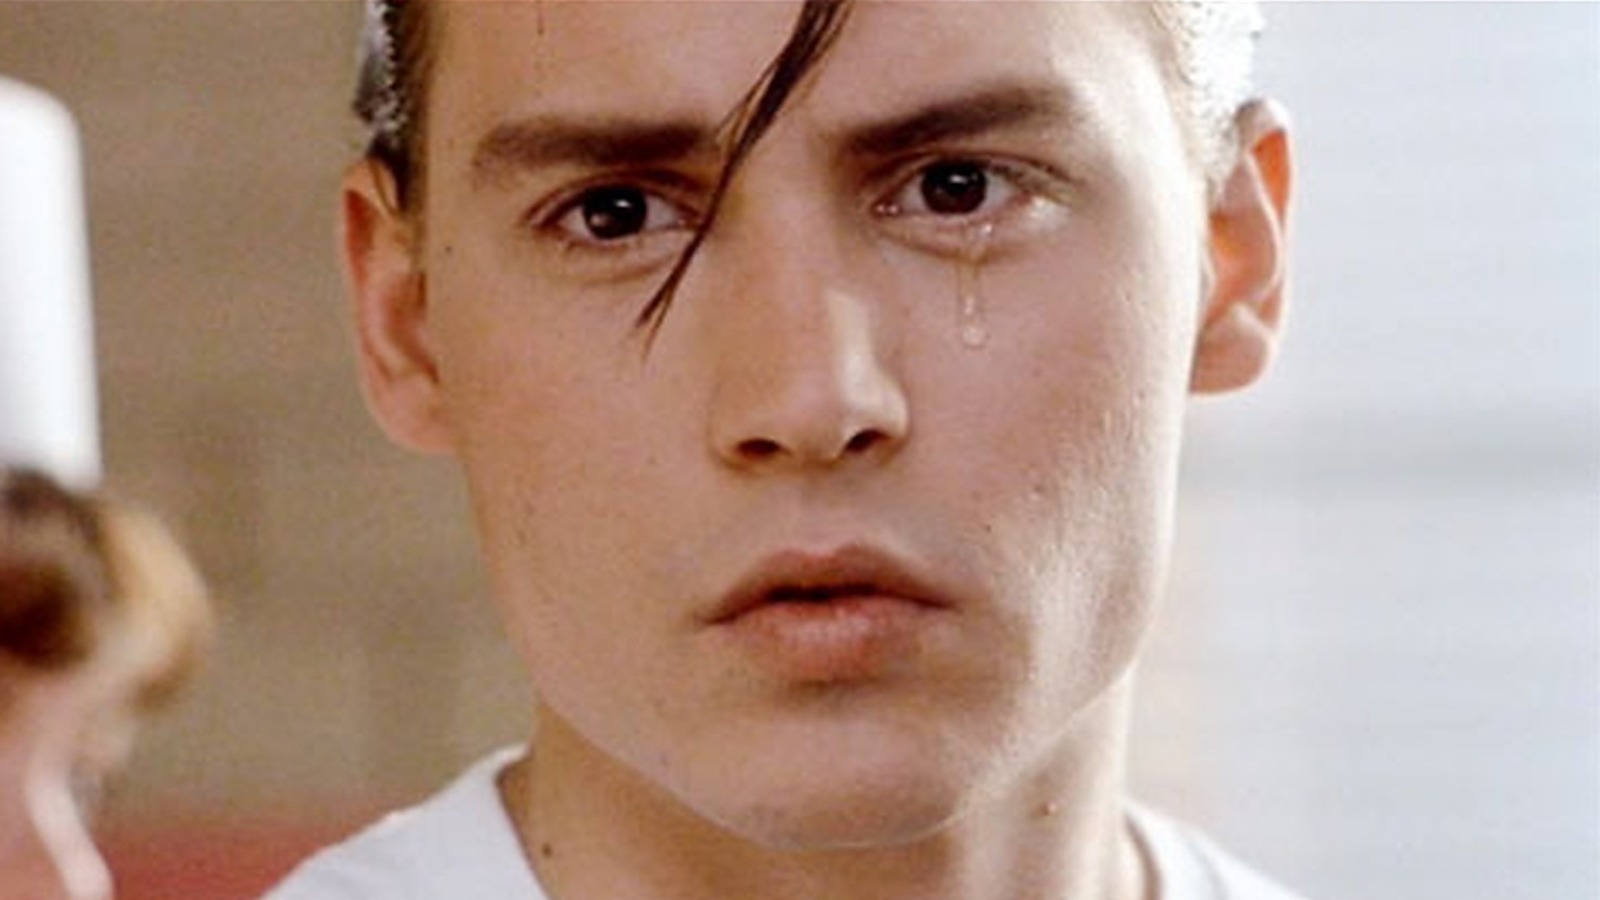 #Johnny Depp Turned Down American Psycho — And That Changes The Movie Completely